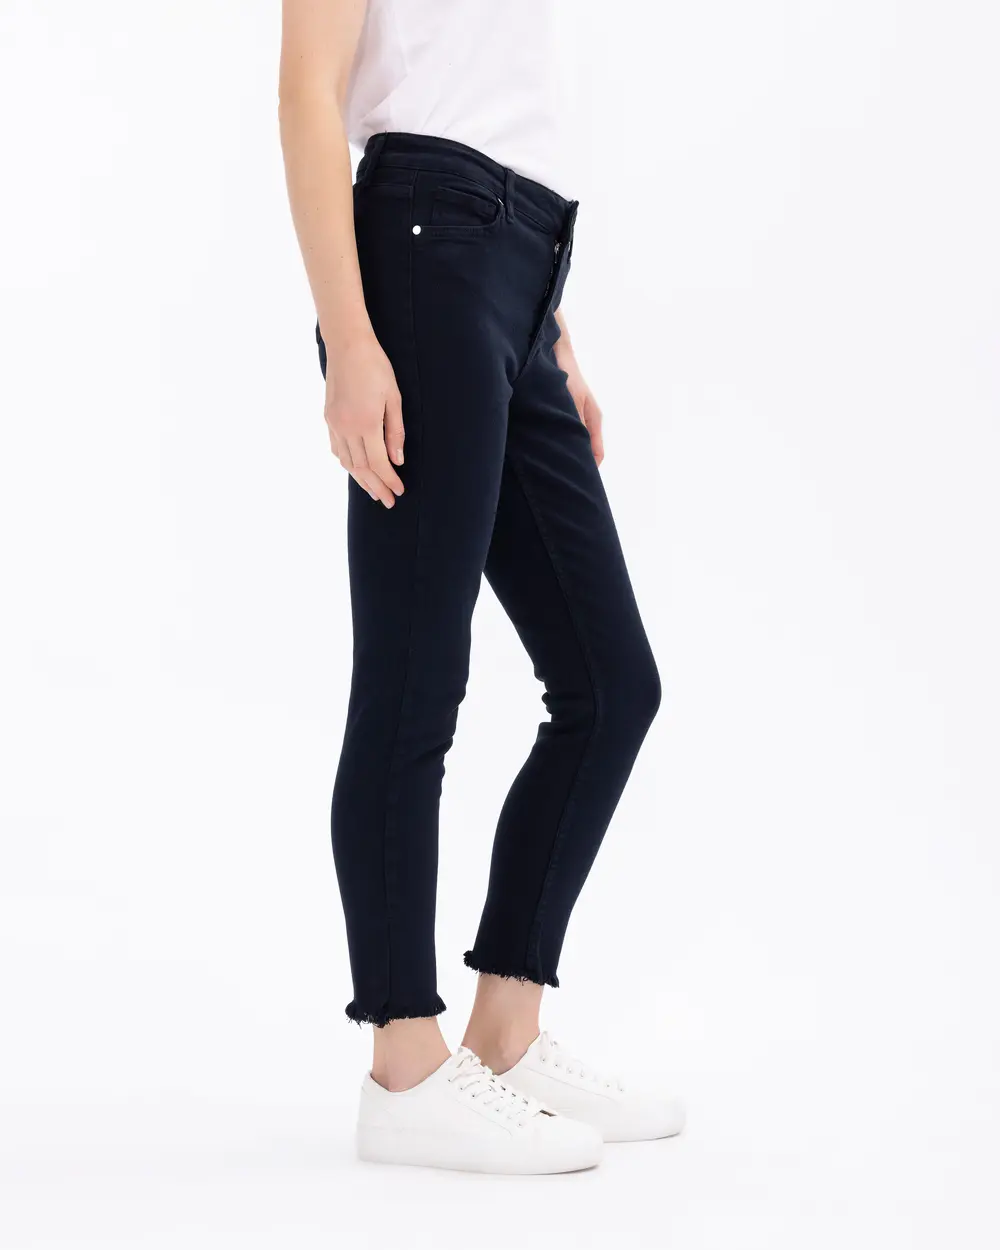 Skinny Ankle-Length Distressed Pants